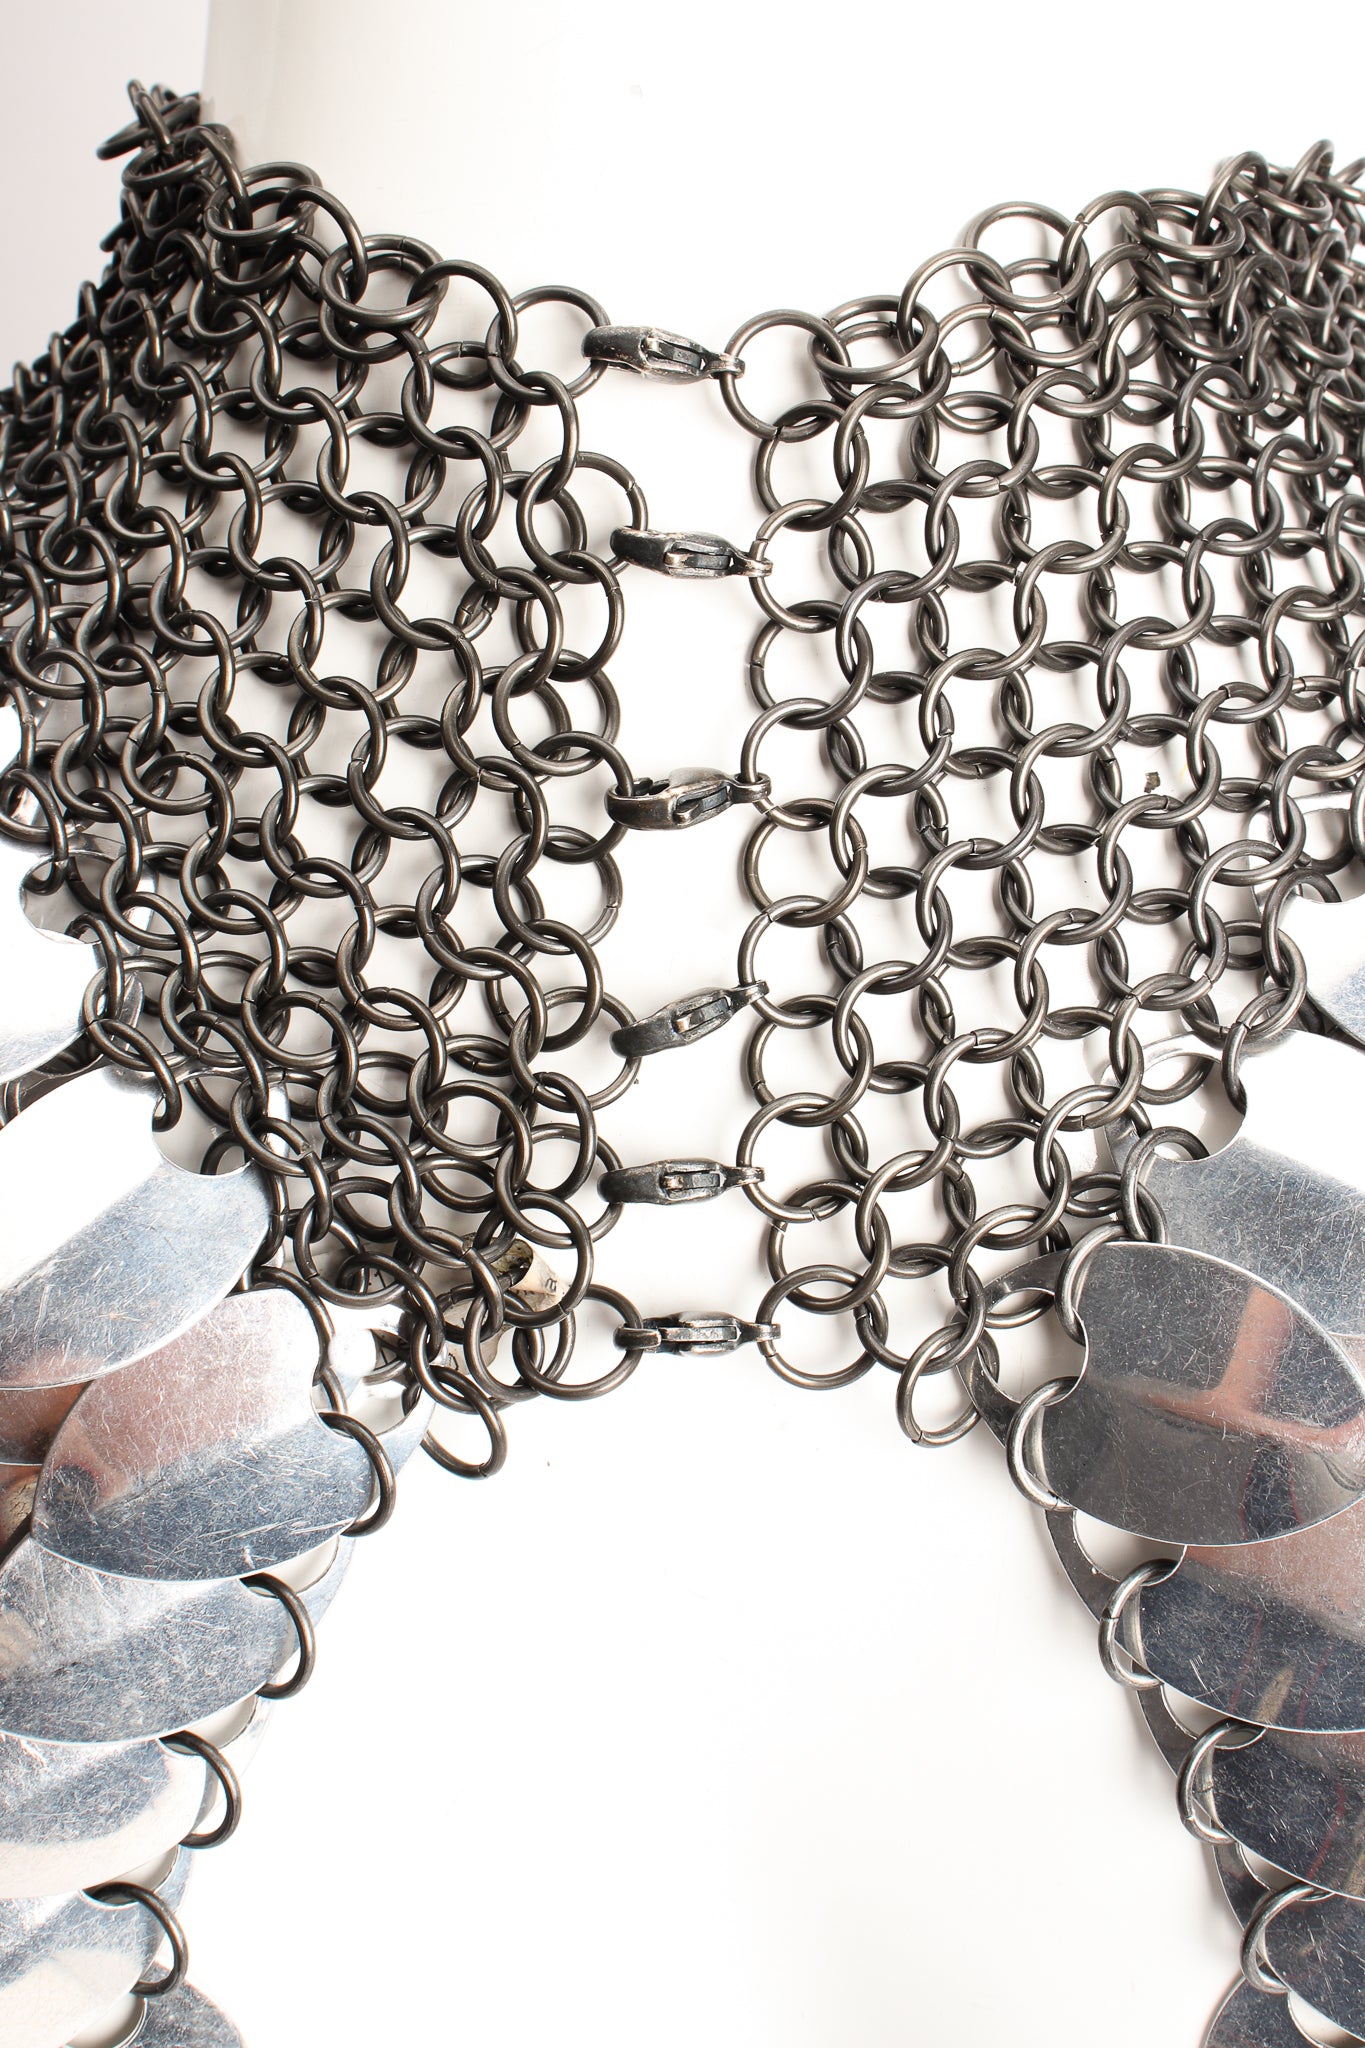 Vintage Chainmail Scale Yoke Collar Choker Necklace lobster clasp closures at Recess Los Angeles